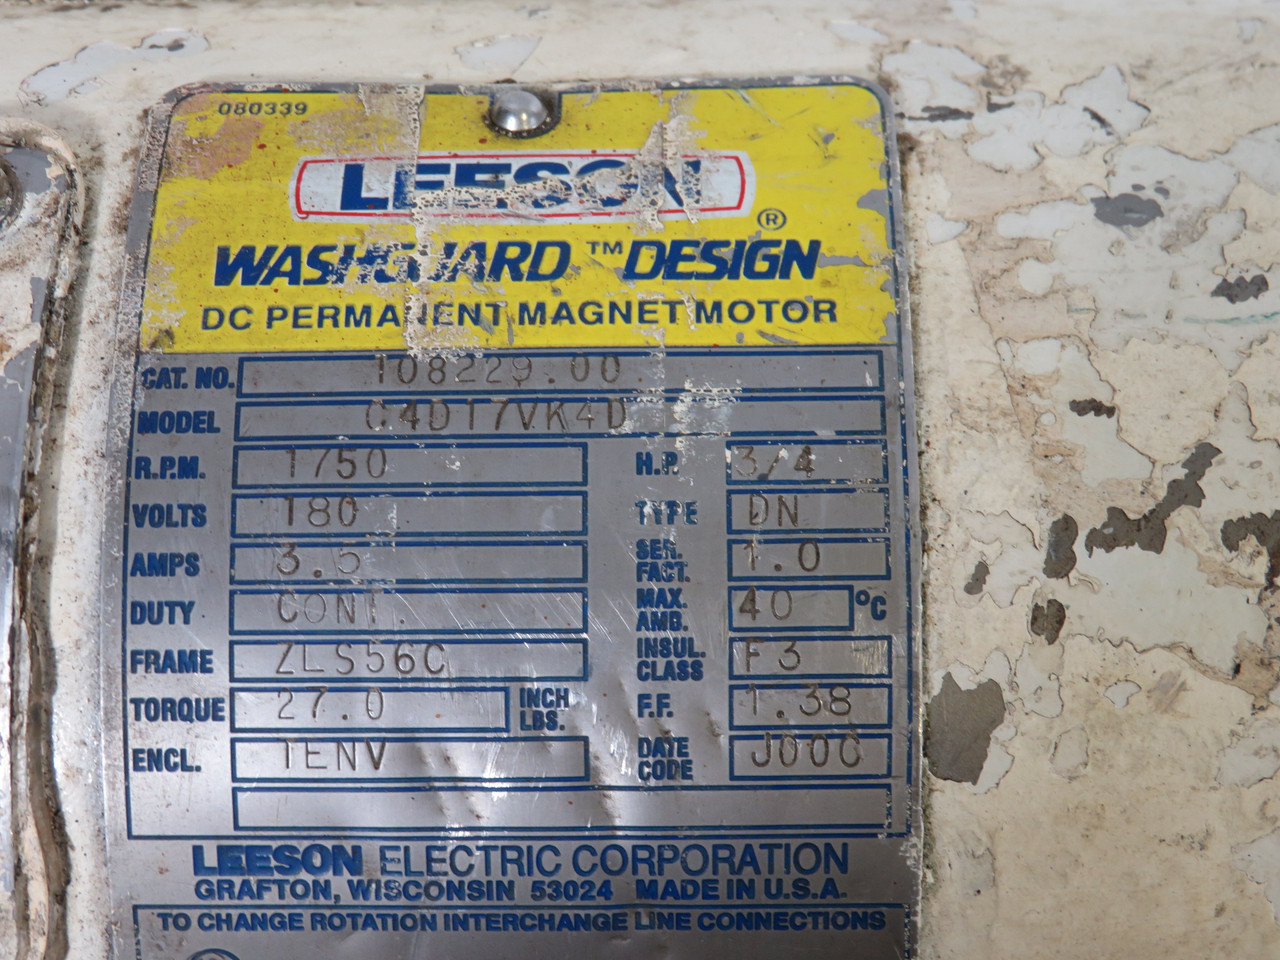 Leeson 27.0Lbs-In 3/4HP 1750RPM 180V ZLS56C C/W Reducer UNKNOWN RATIO USED